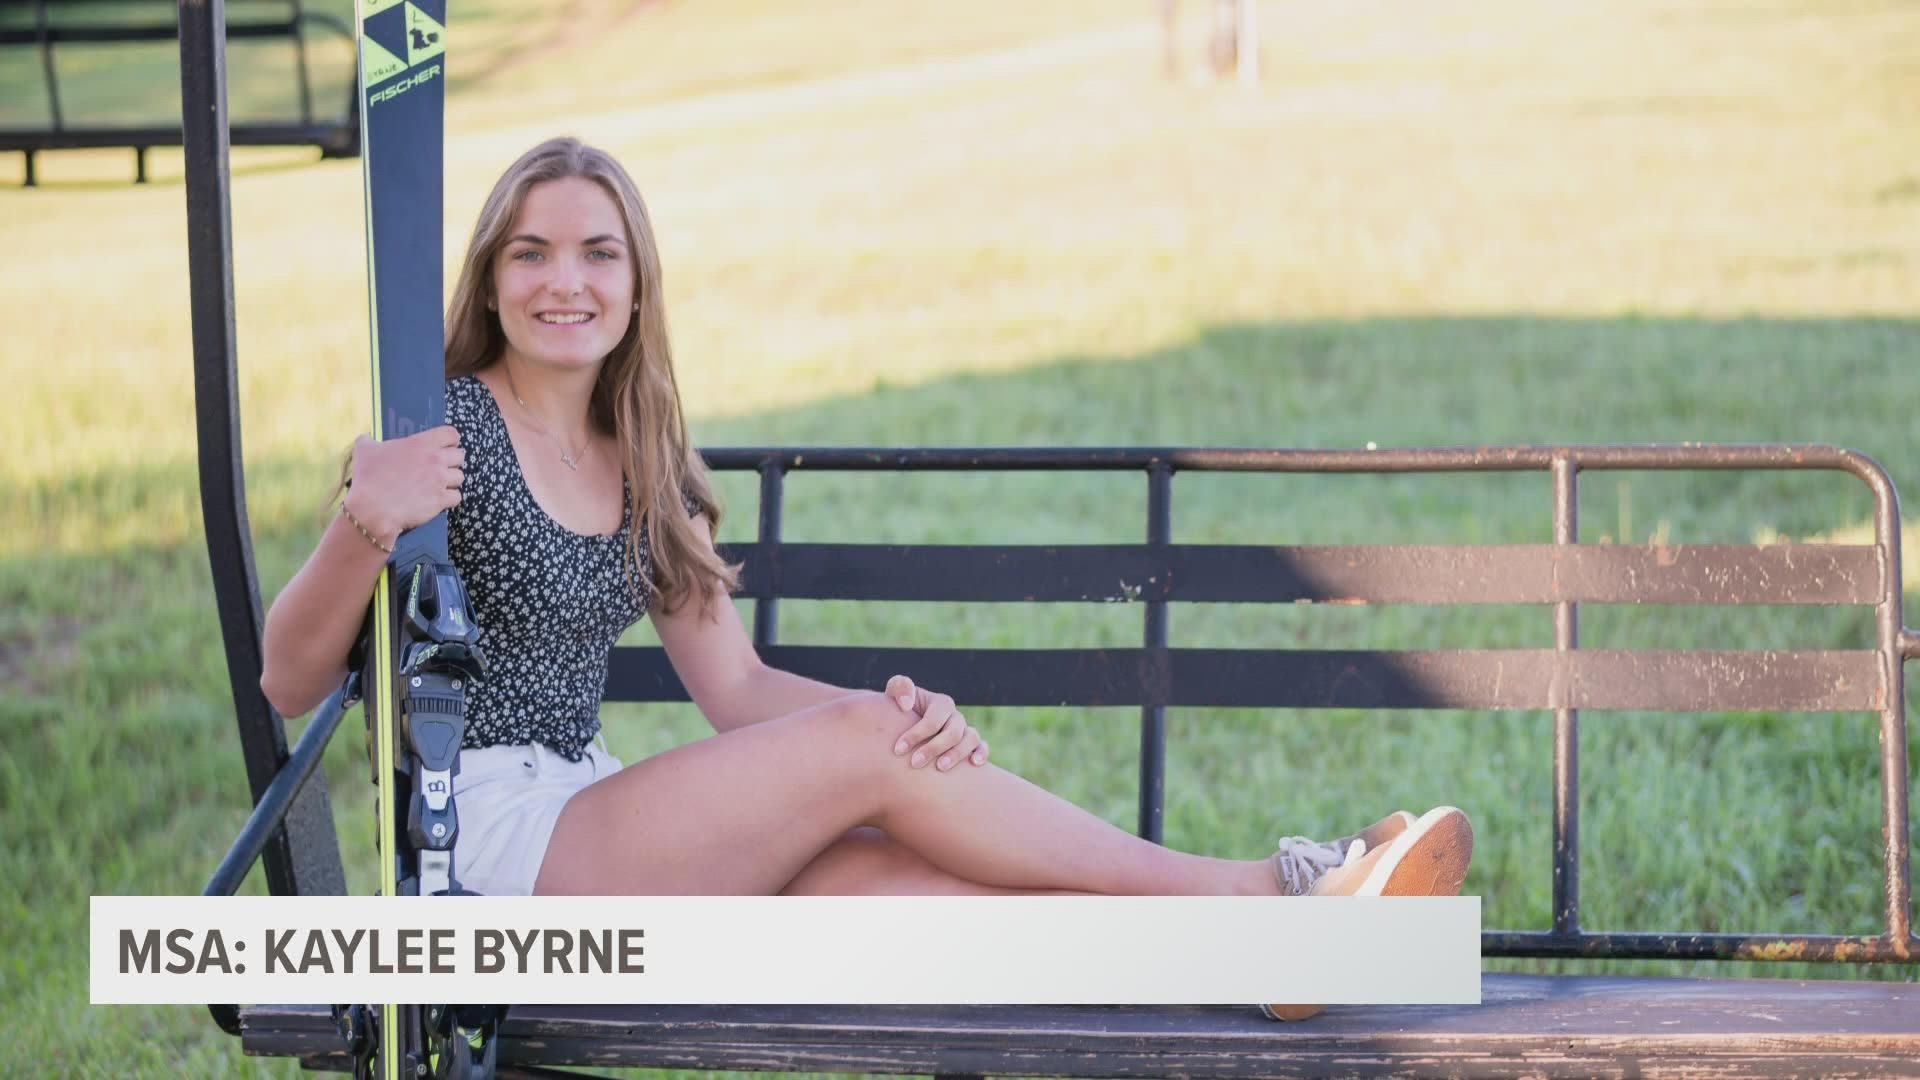 Byrne hopes to go to Northern Michigan and join the ski team.